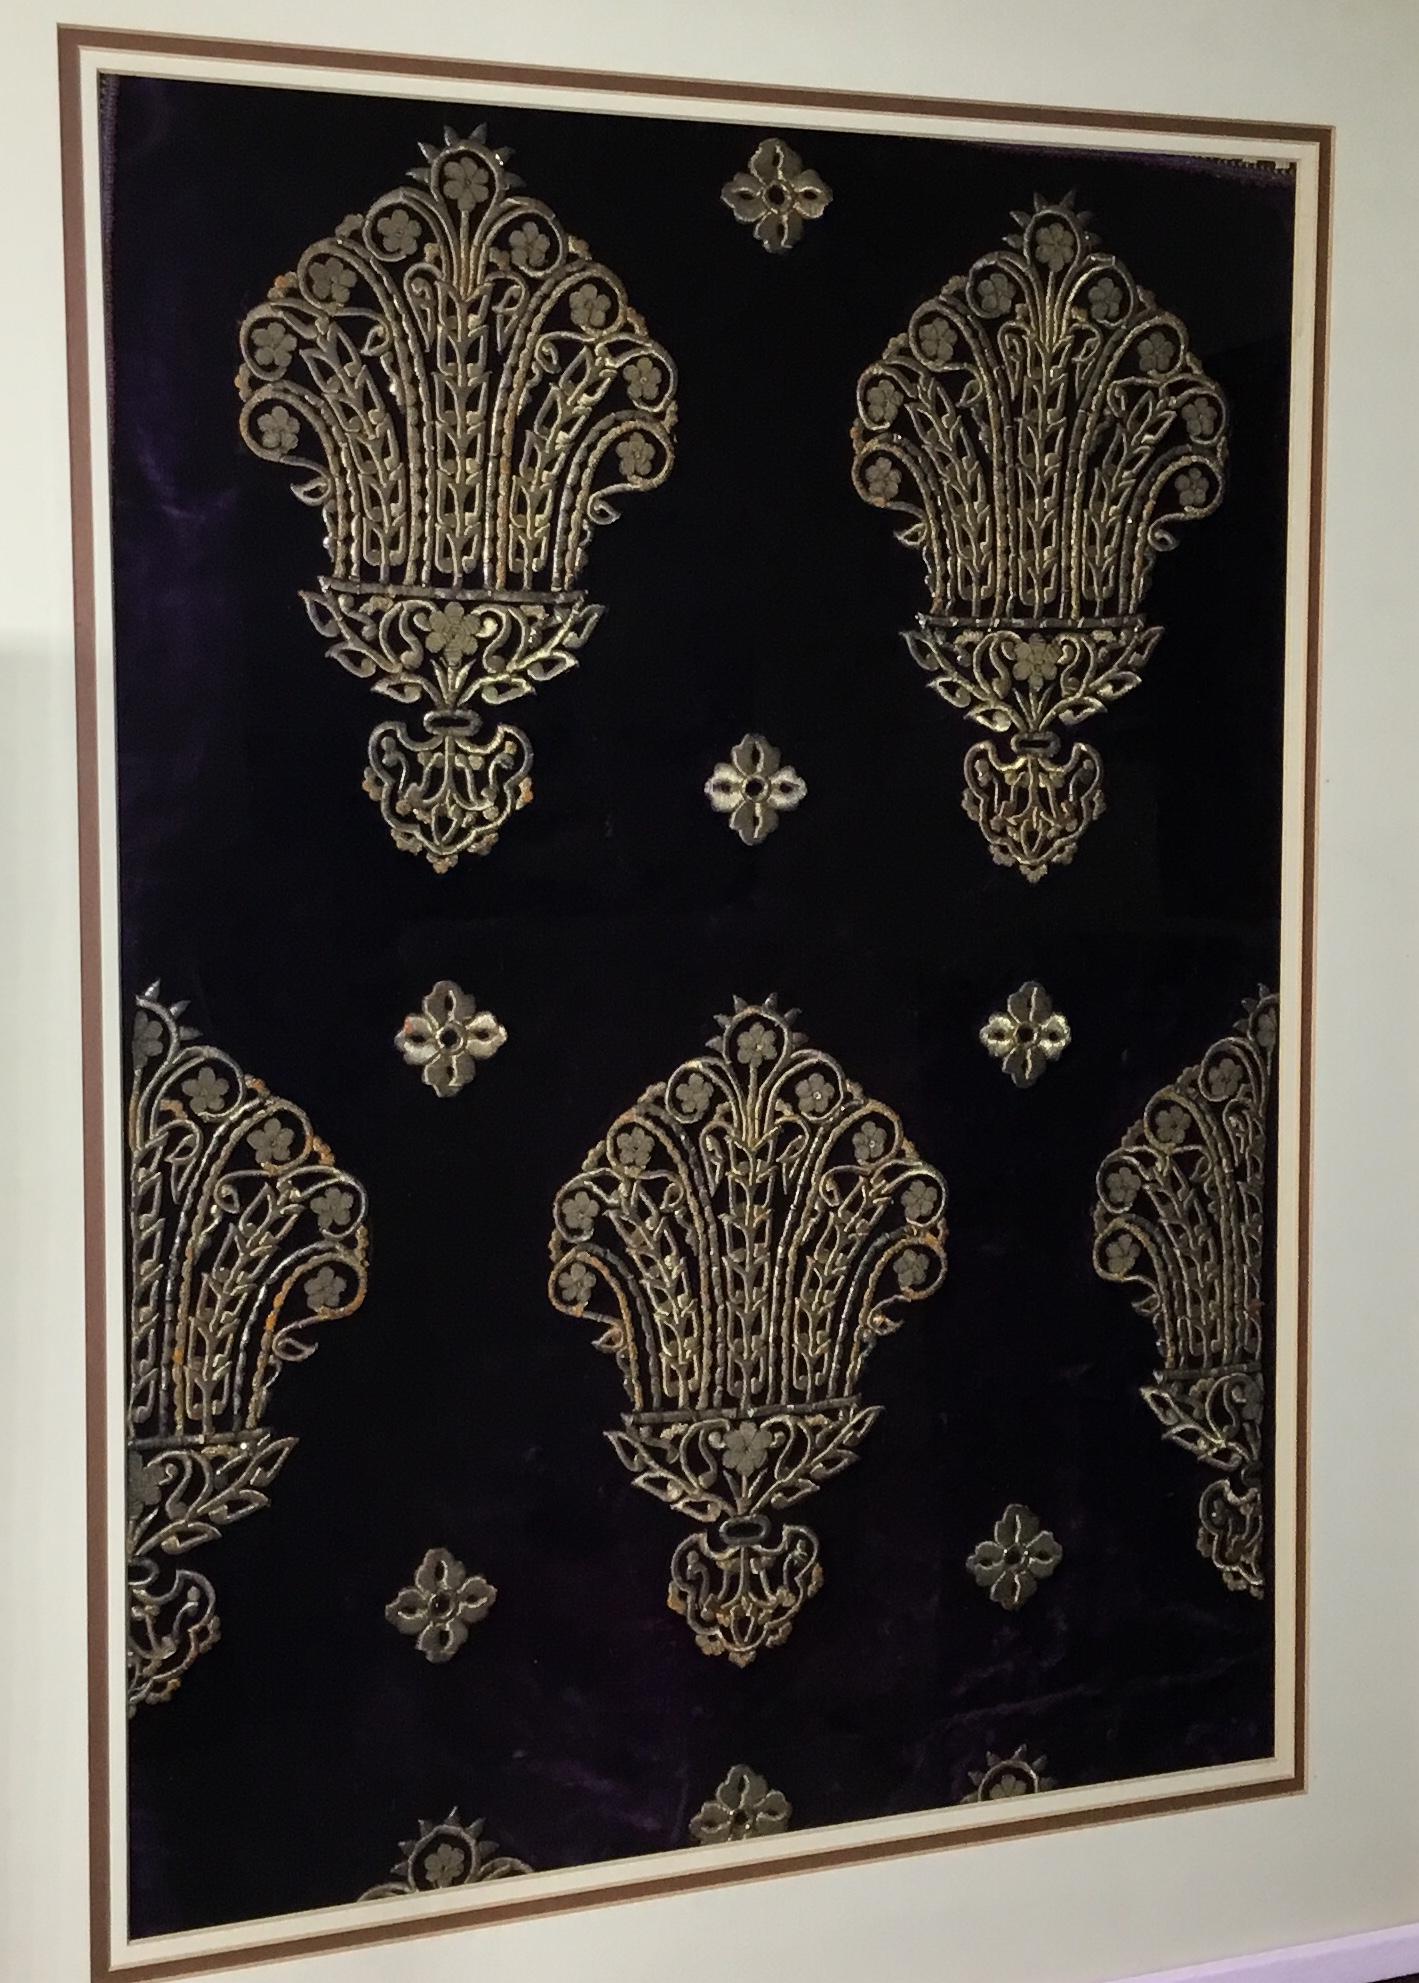 Turkish Hand Embroidery Textile in Shadowbox In Good Condition For Sale In Delray Beach, FL